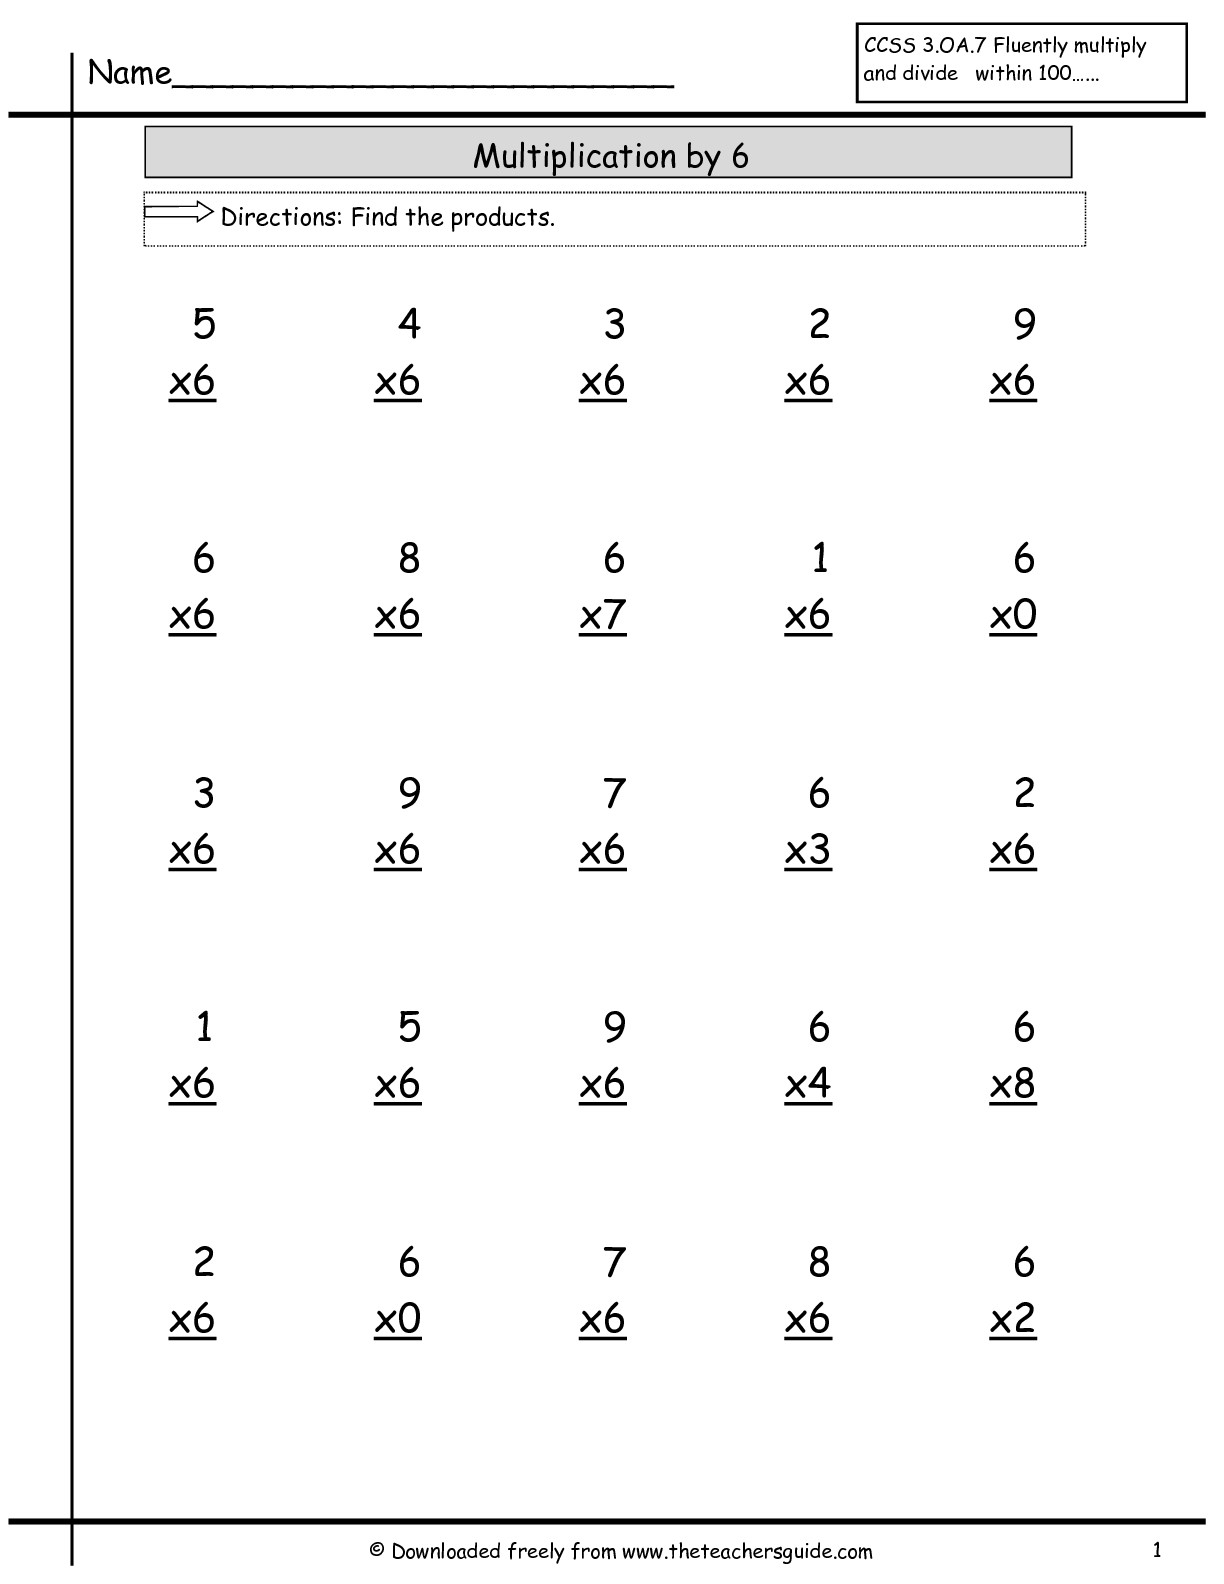 Multiplication Facts Worksheets From The Teacher&amp;#039;s Guide within Printable Multiplication 8S